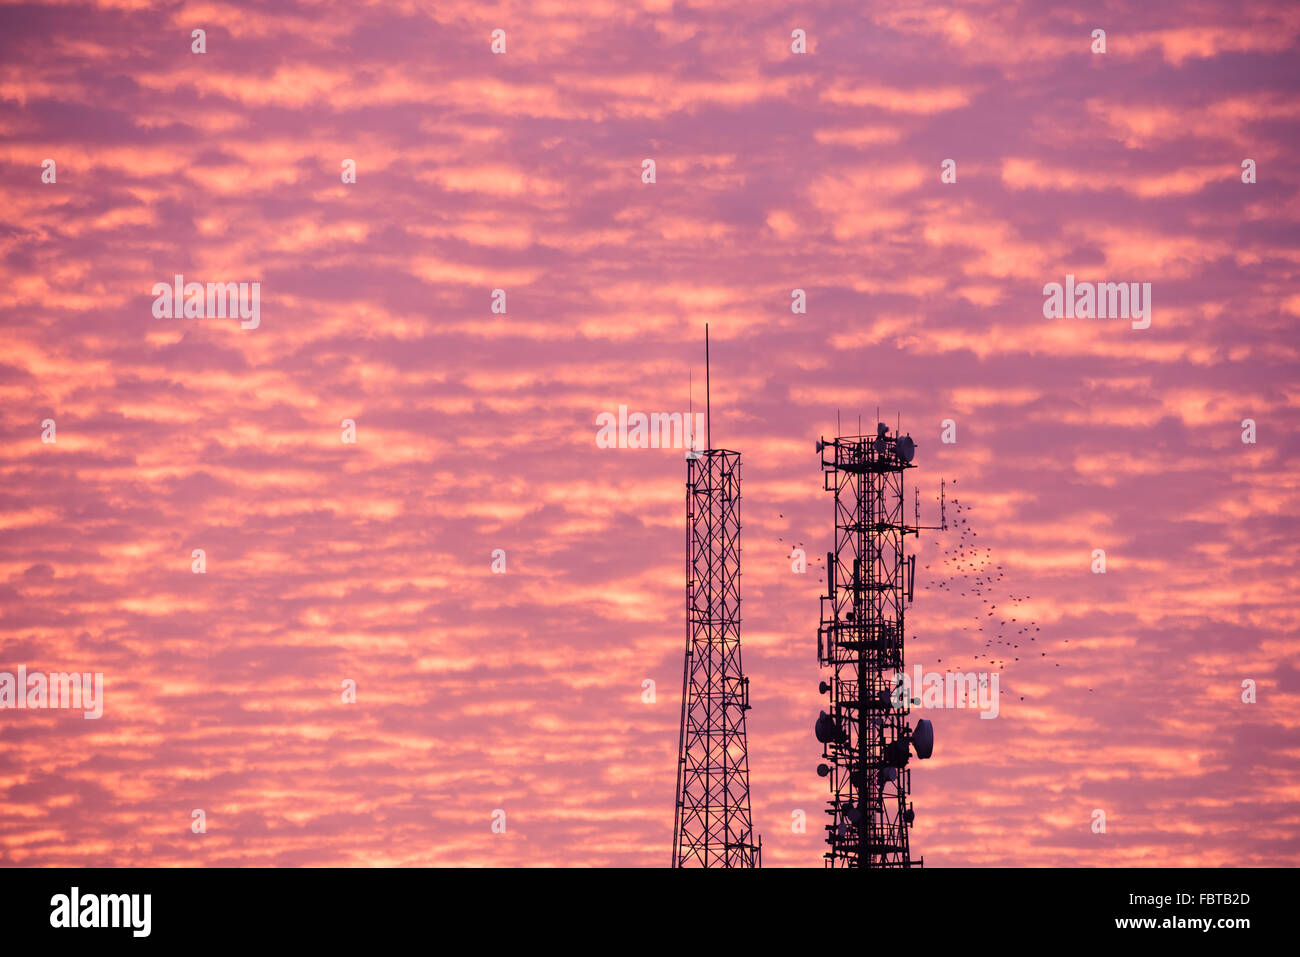 Dramatic sunrise with puffy altocumulus clouds, radio communication towers and flock of birds. Stock Photo